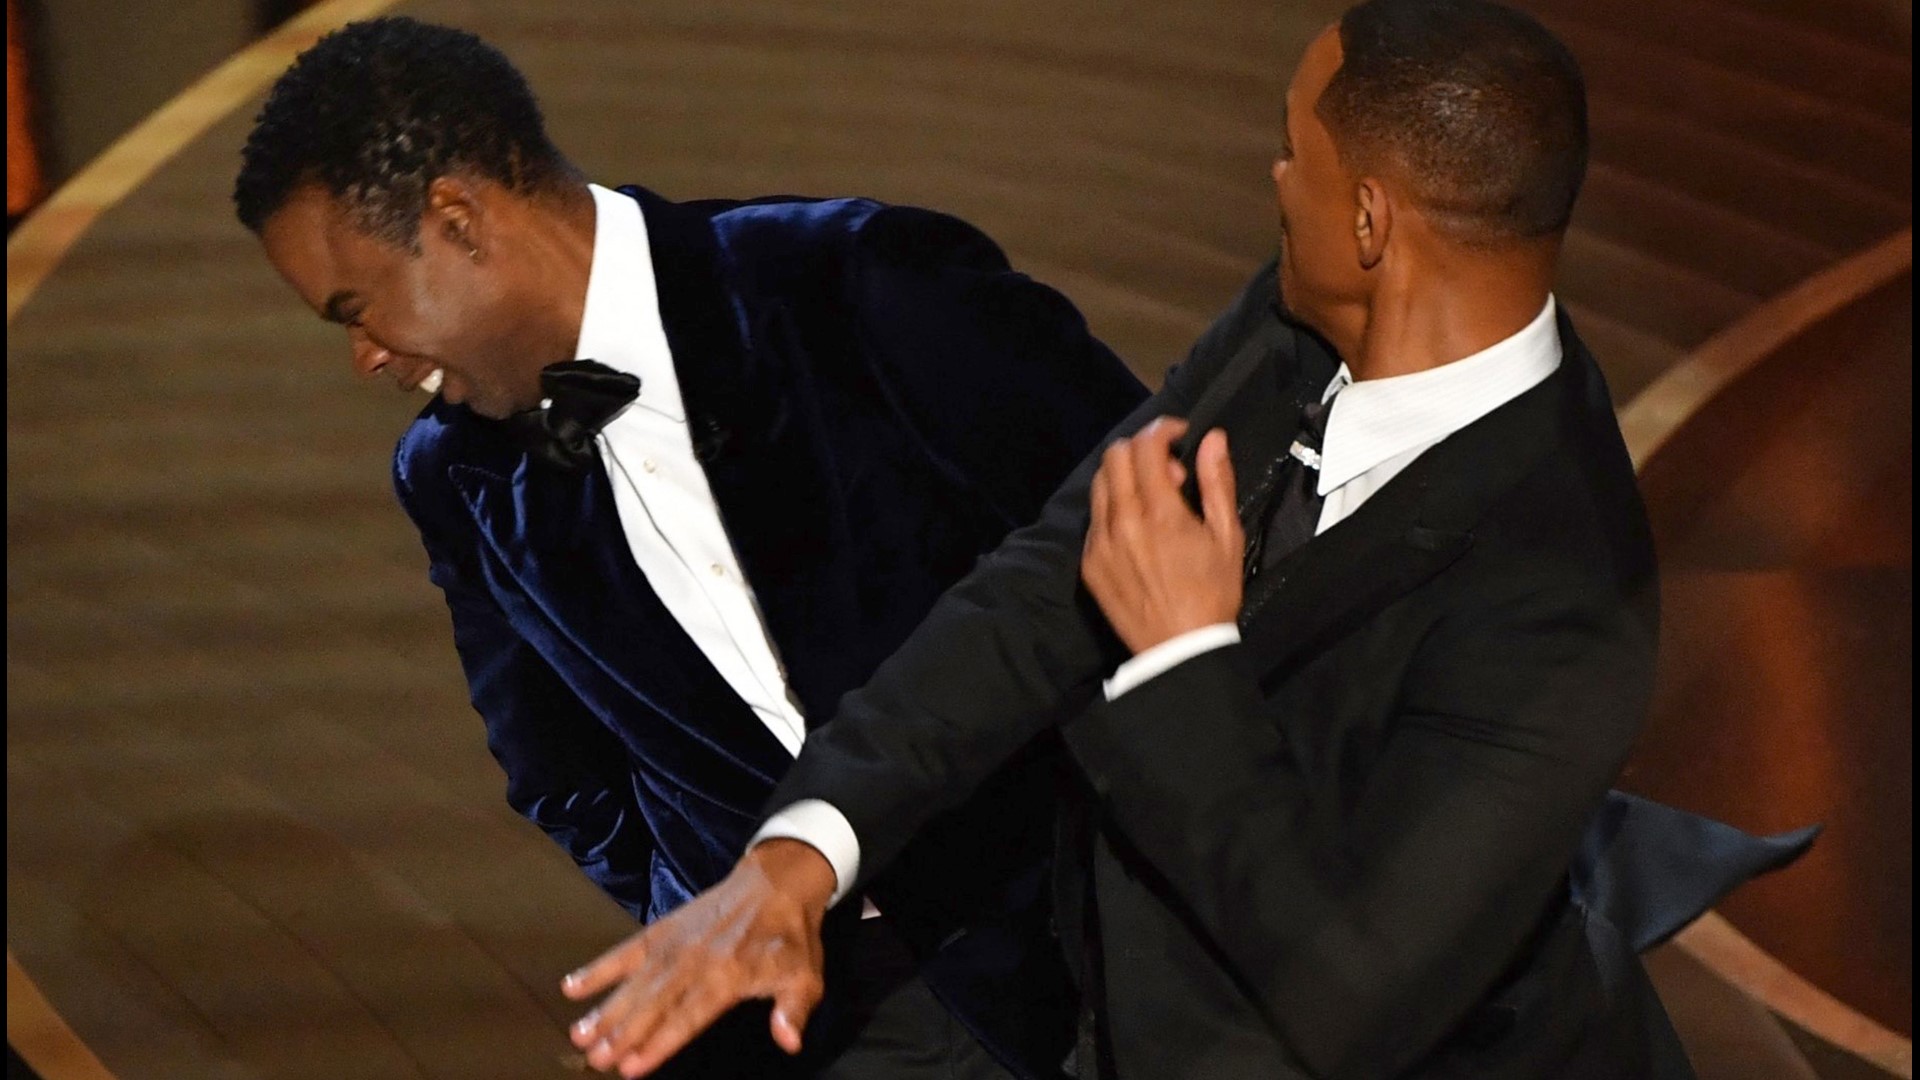 The Los Angeles Police Department was ready to arrest Will Smith following the incident that took place during the 2022 Academy Awards. Veuer's Maria Mercedes Galuppo has the story.